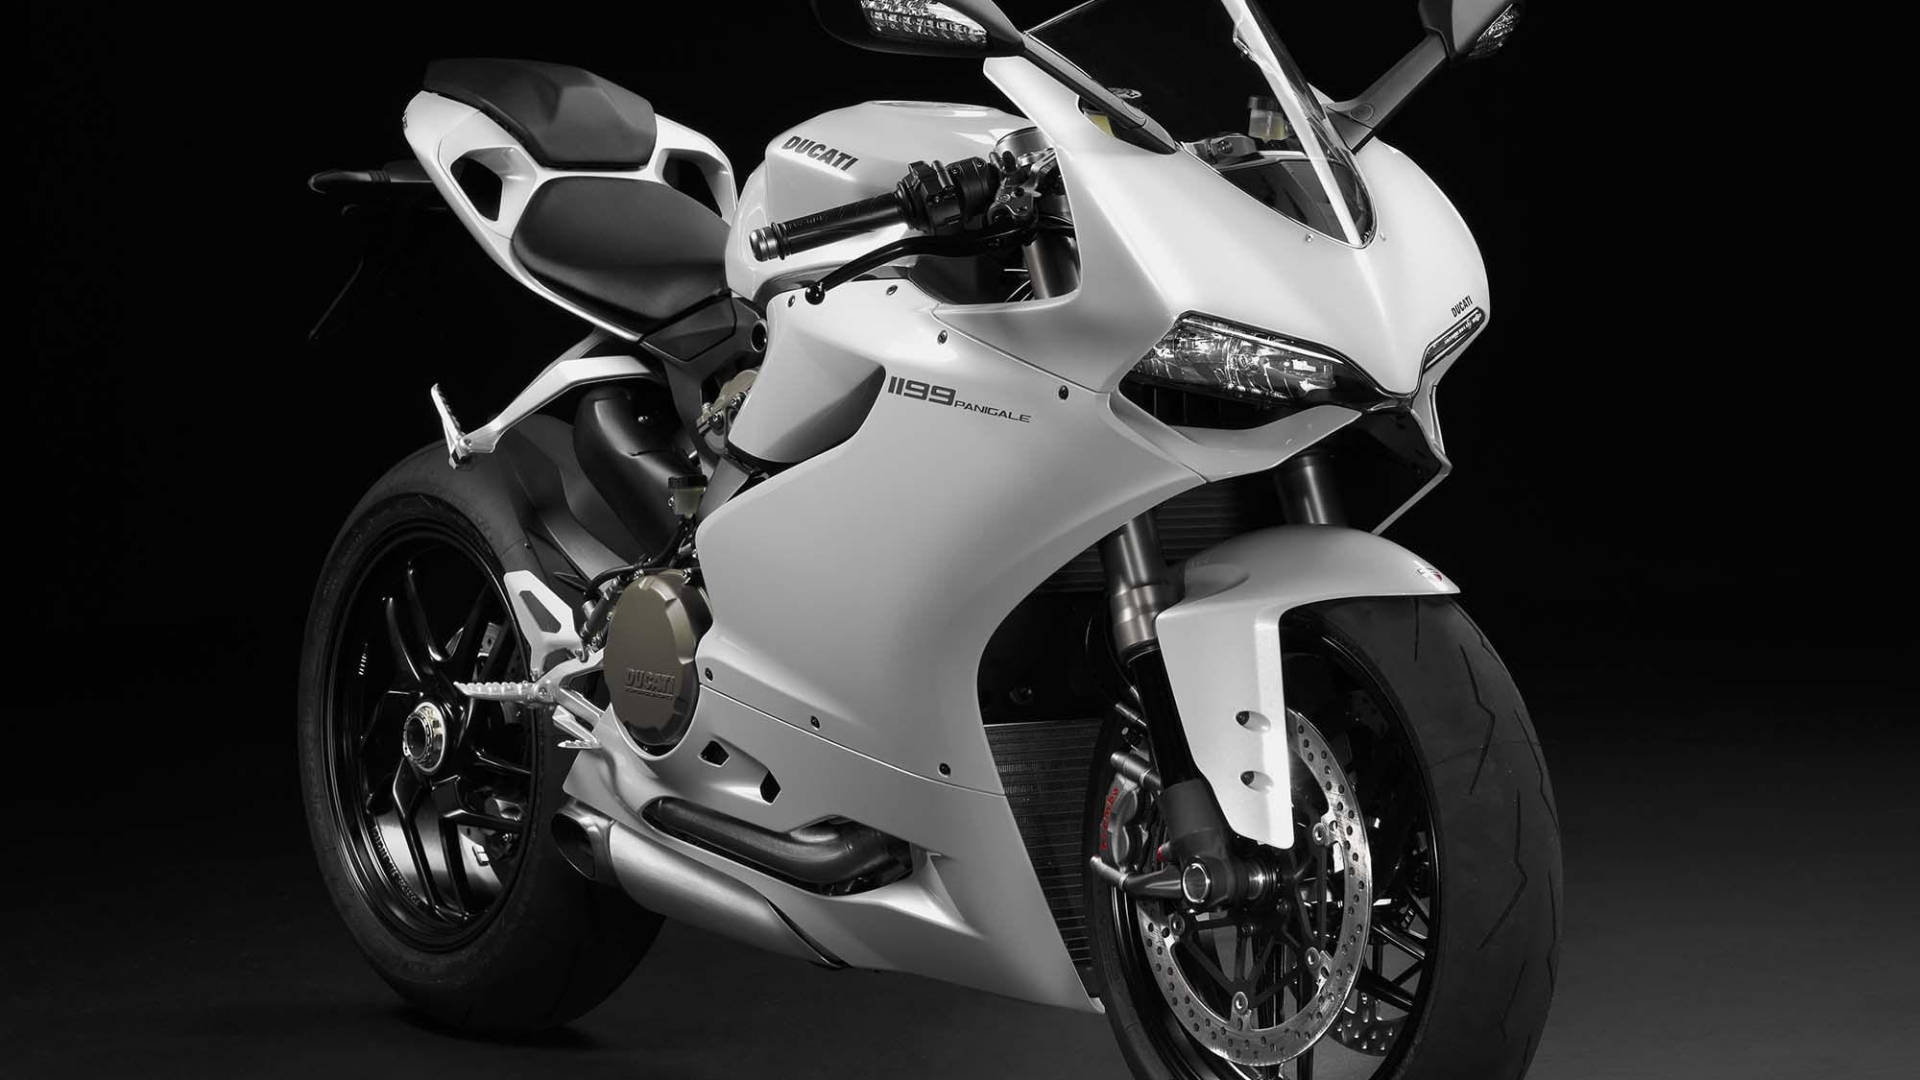 Enjoy The Speed And Style Of The Ducati 1199 Panigale In Arctic White